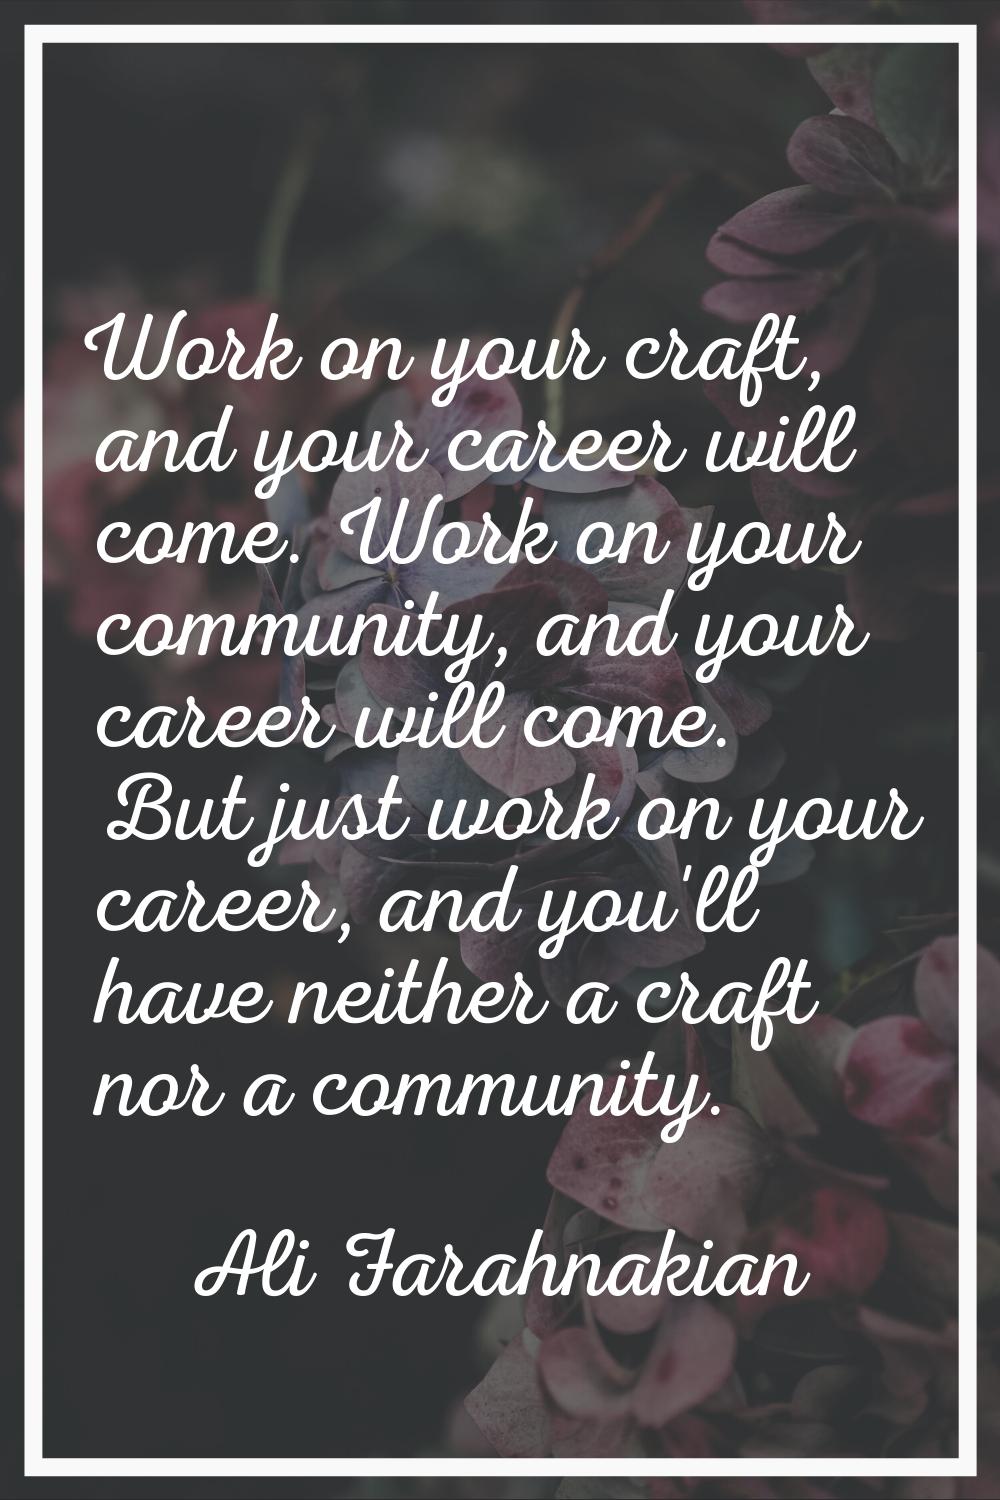 Work on your craft, and your career will come. Work on your community, and your career will come. B